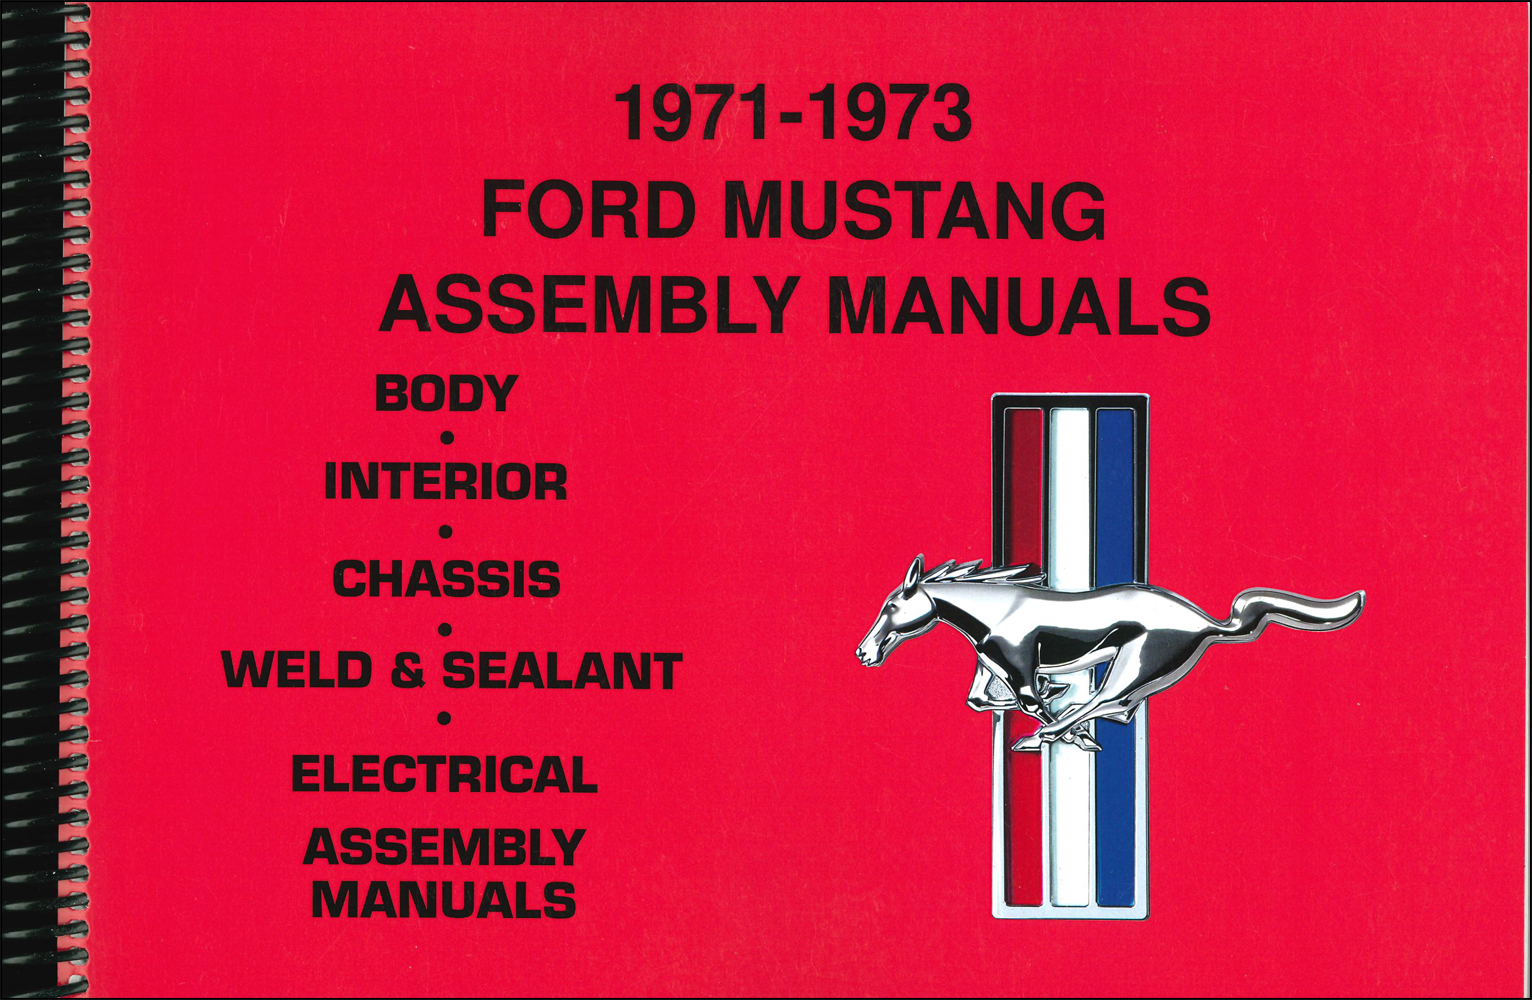 1971-1973 Ford Mustang Assembly Manual Reprint set of 6 Books in 1 Volume